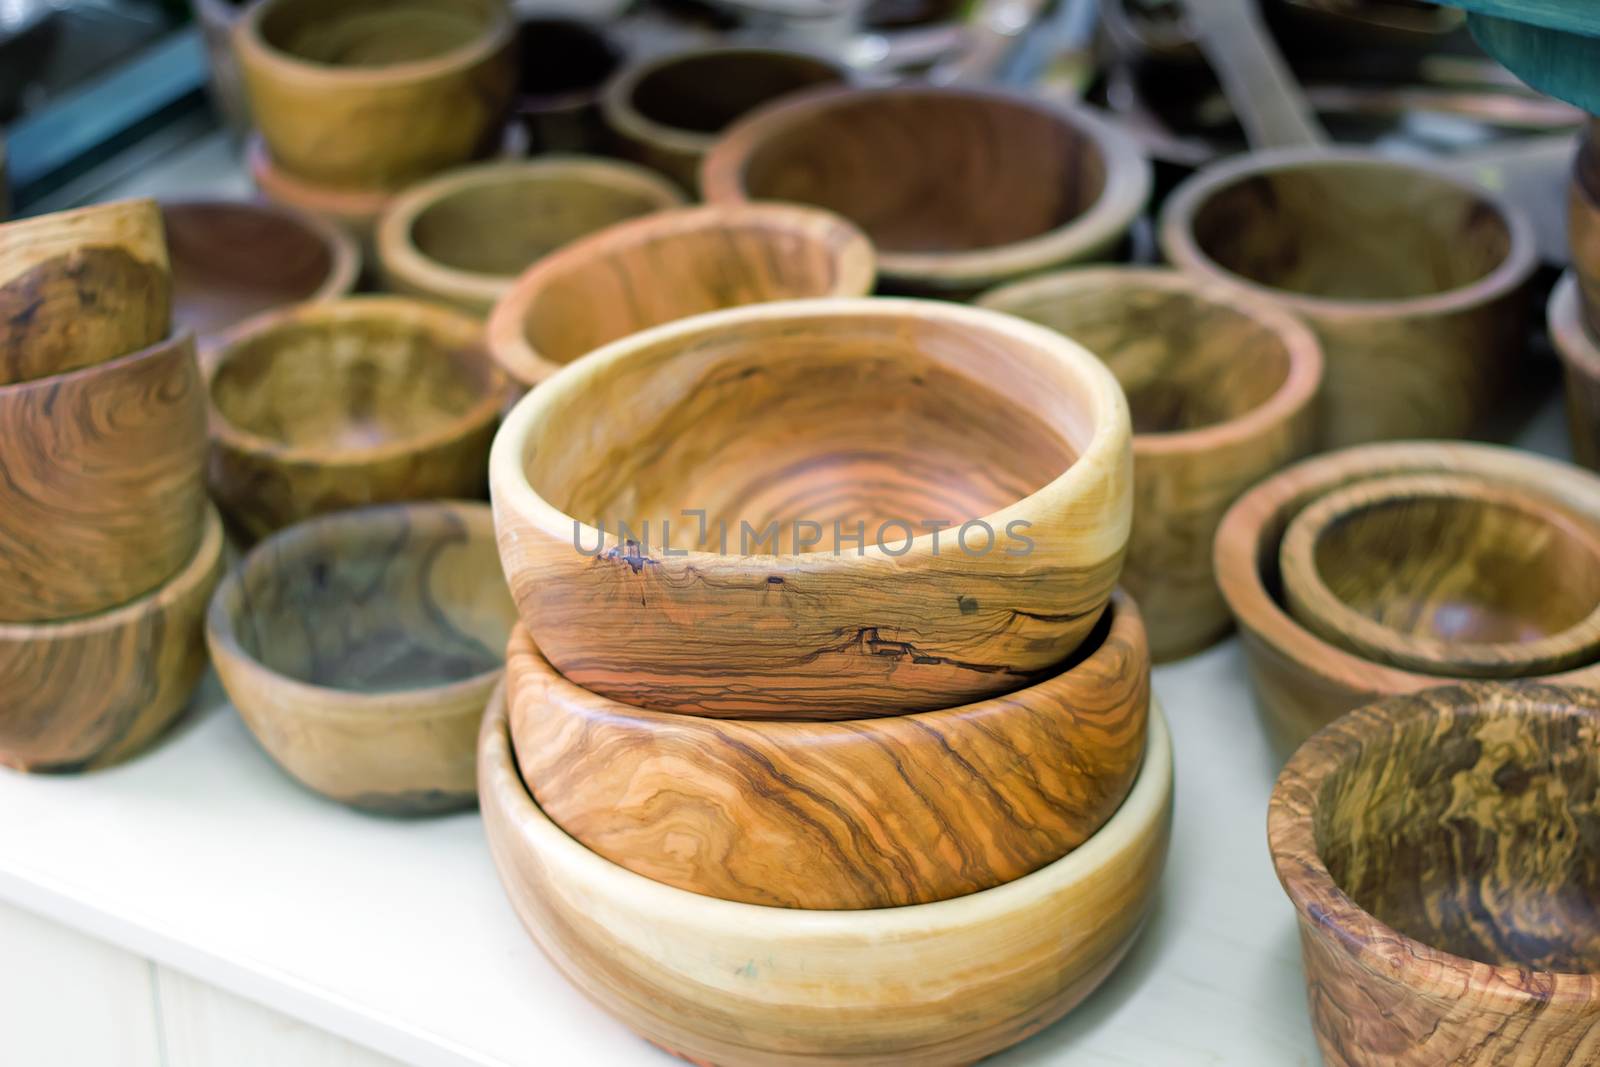 The storefront shows the original dishes from different types of wood, handcrafted.